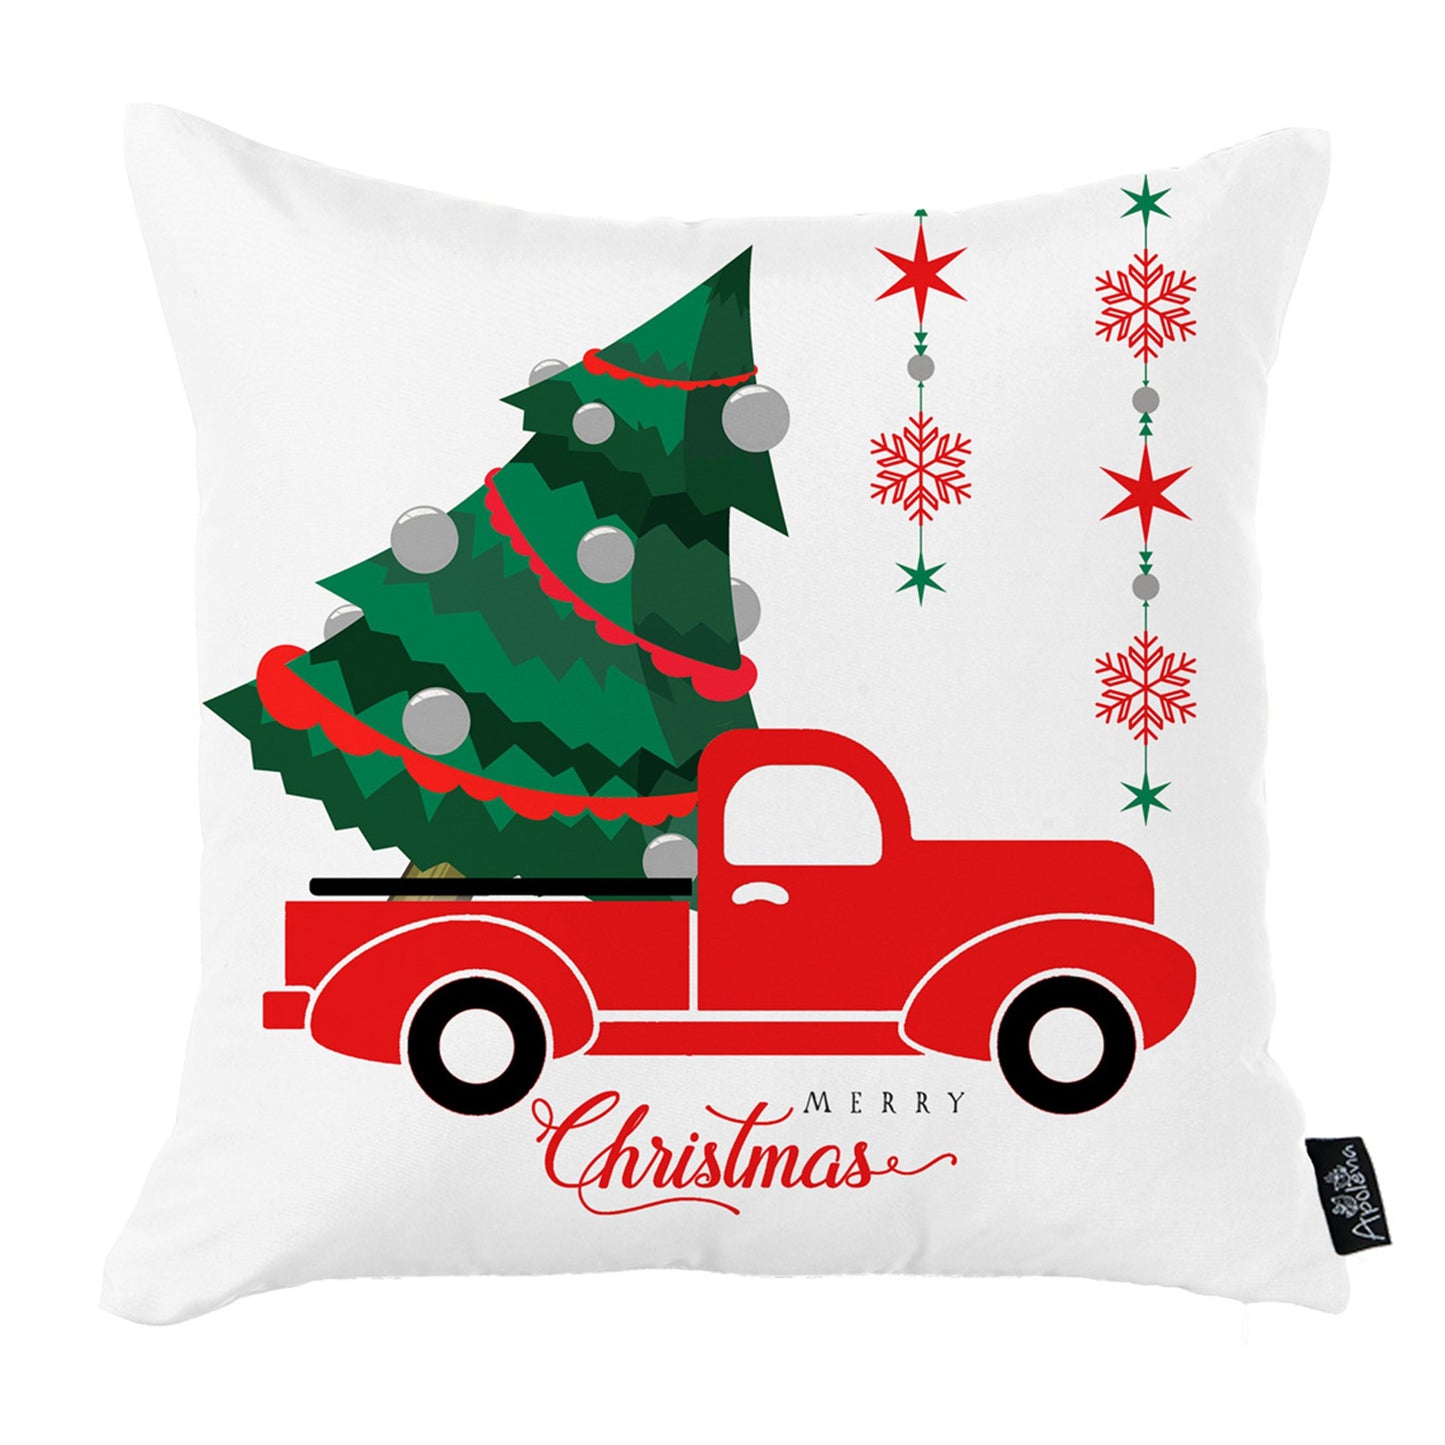 Decorative Christmas Themed Throw Pillow Cover Set of 4 Square 18" x 18" Multi-Color for Couch, Bedding